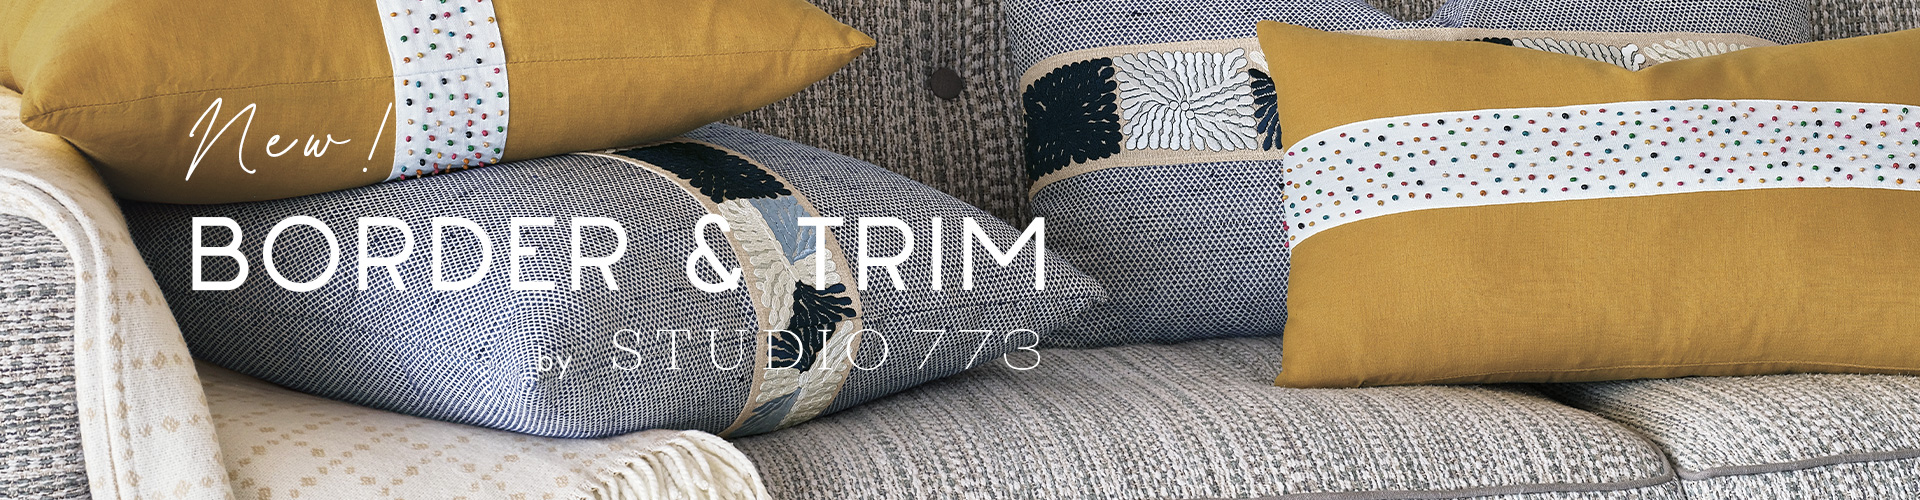 New! Border and Trim by Studio 773